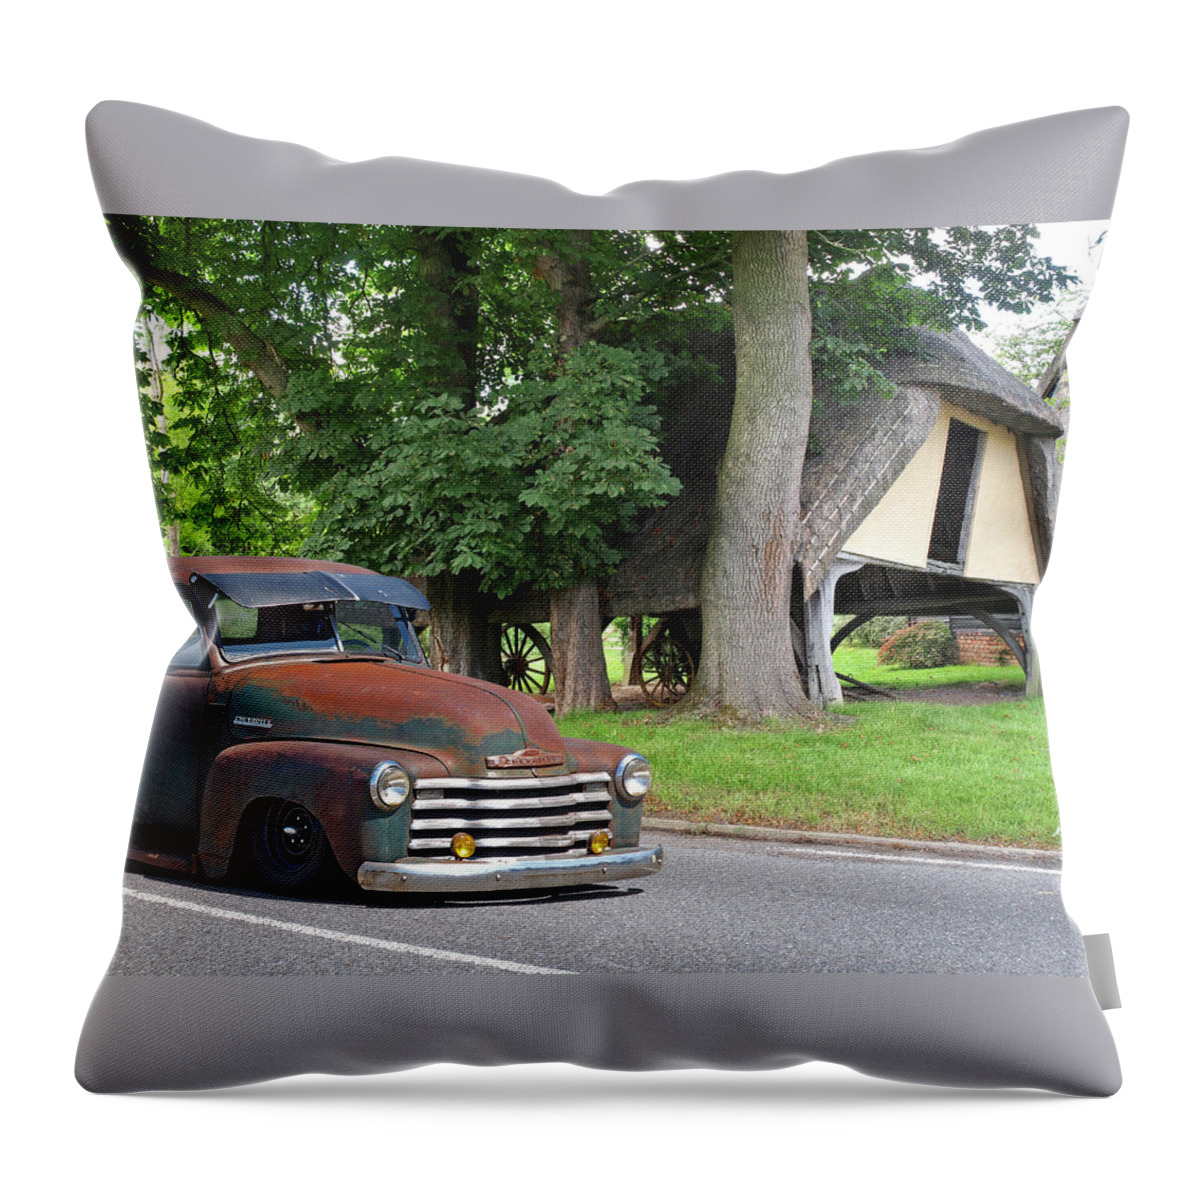 Chevrolet Truck Throw Pillow featuring the photograph 1950 Rusty Chevy Truck Outside Old Barn by Gill Billington